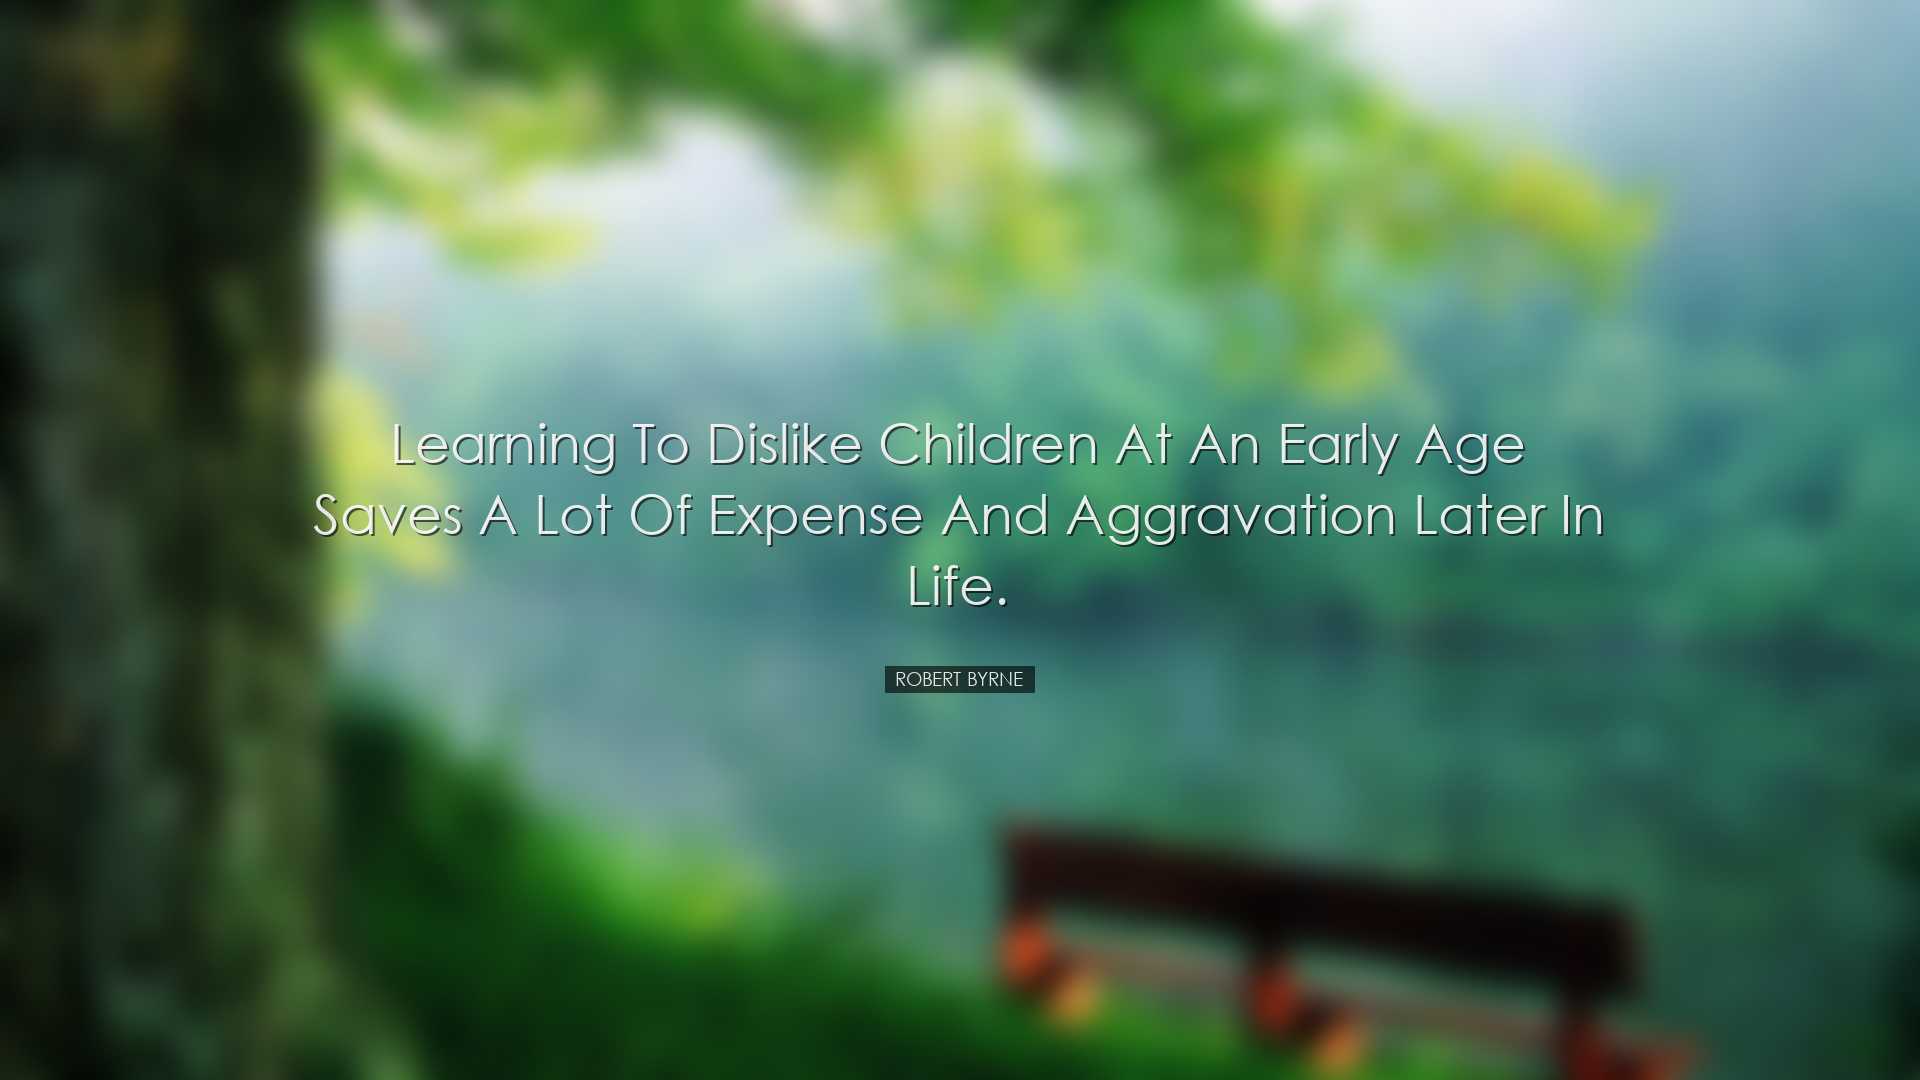 Learning to dislike children at an early age saves a lot of expens